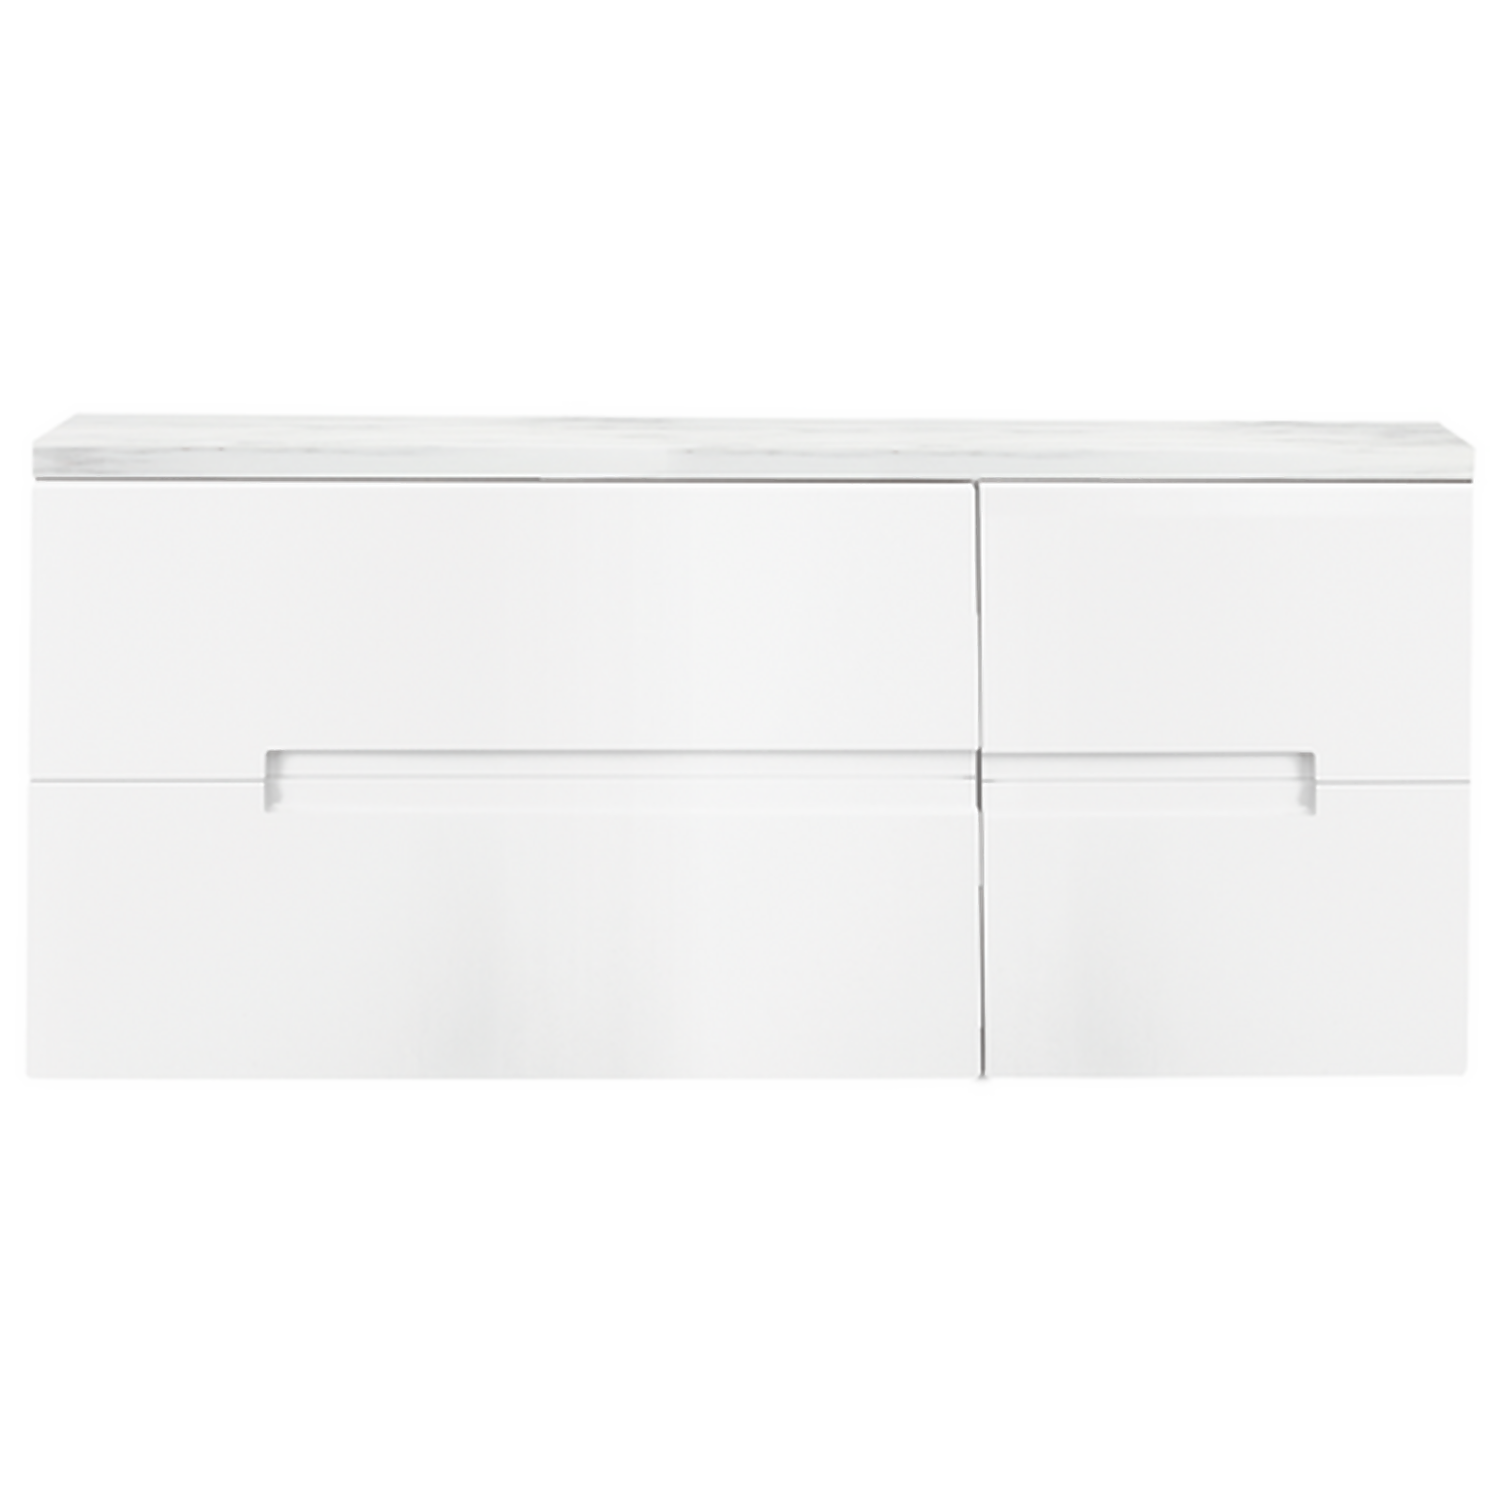 Vermont 1200mm Wall Mounted Vanity Unit with Carrara White Worktop - Gloss White